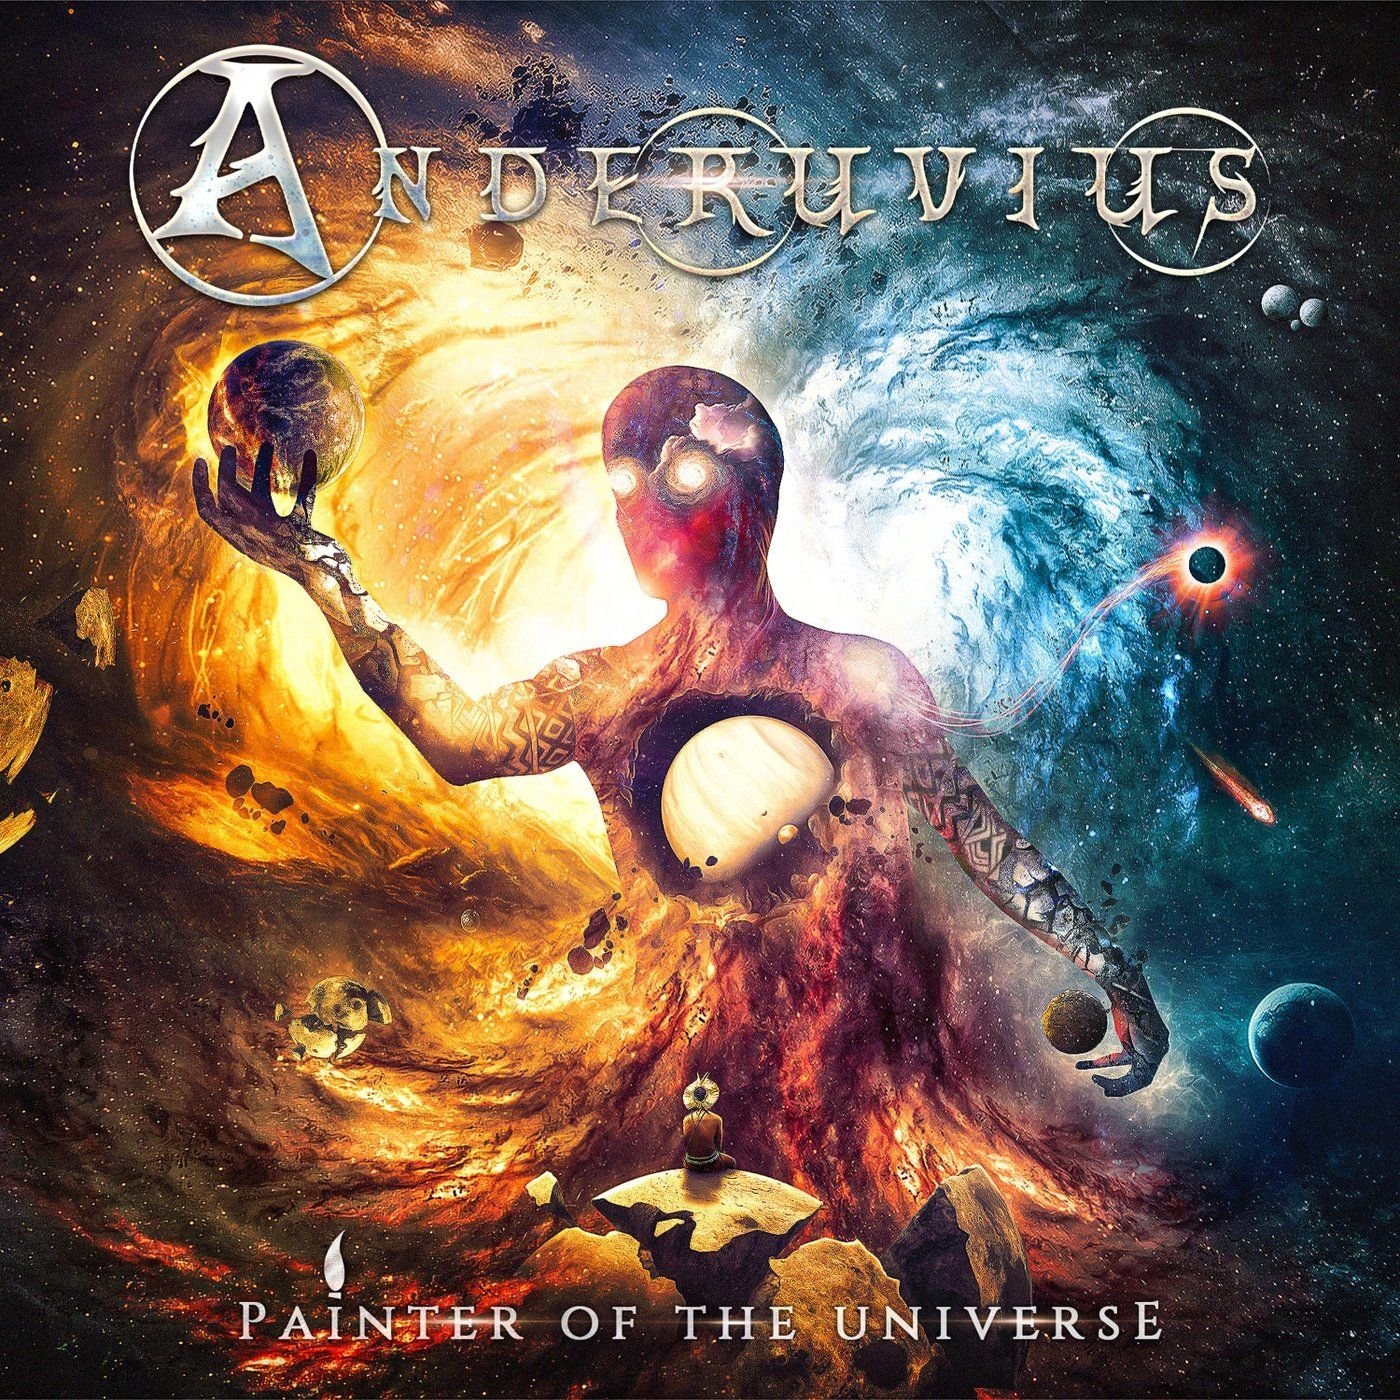 Anderuvius - Painter of the Universe (2021) FLAC Download